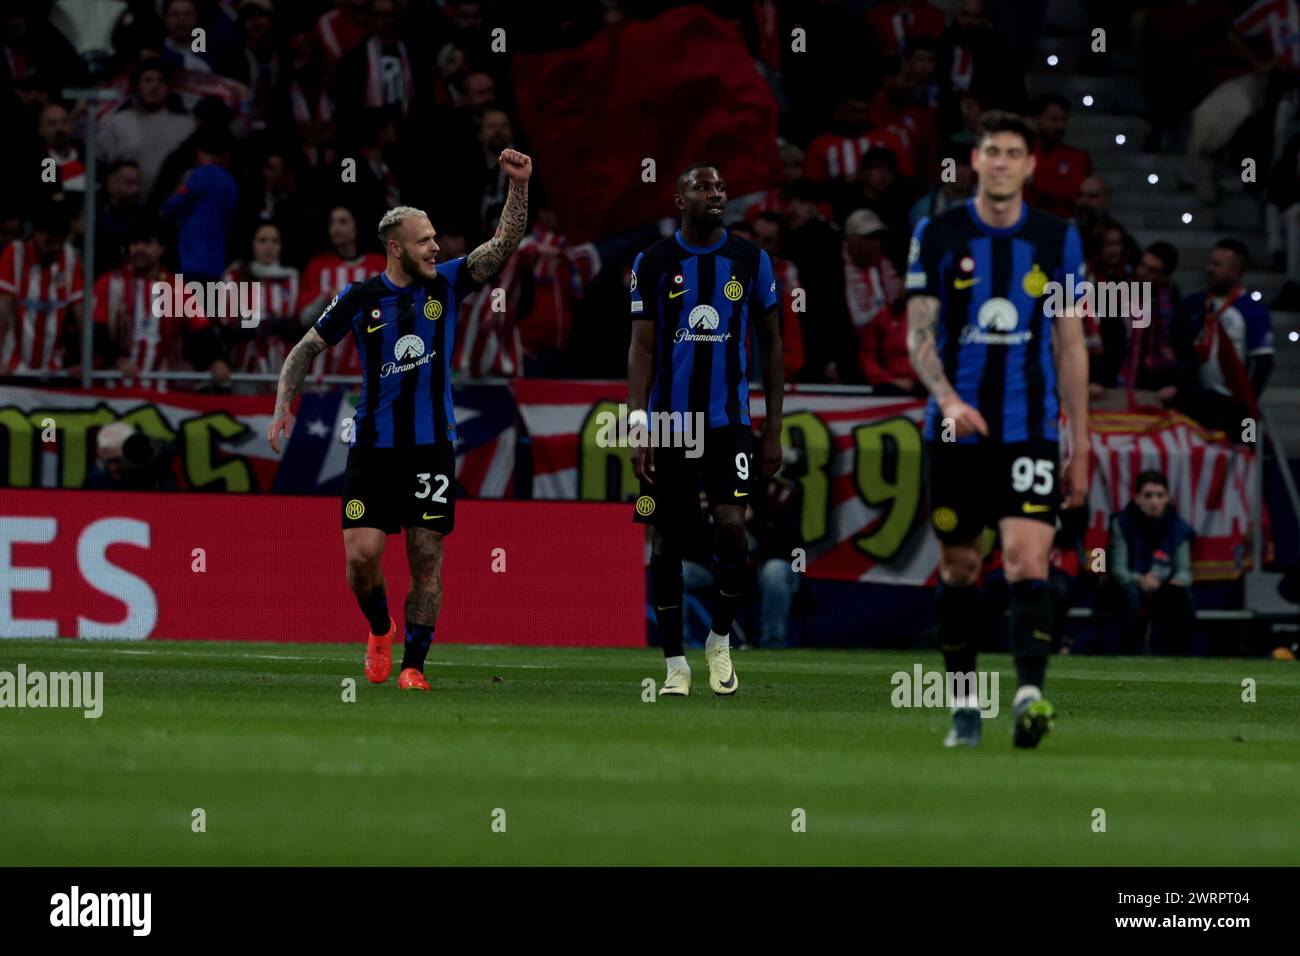 Madrid, Spanien. 13th Mar, 2024. Madrid, Kingdom of Spain; 03/14/2024.- Internacional Milan players celebrate their goal. Atletico de Madrid beats Internazionale Milan in round of 16 of Champions League matchday 2 of 2 and moves on to next phase. Atletico de Madrid 2 Inter de Milan 1, final result Atletico wins 3-2 on penalties. Antoine Griezmann 35, and Memphis De Pay 87'. Inter Federico Di Marco 33'. Credit: Juan Carlos Rojas/dpa/Alamy Live News Stock Photo